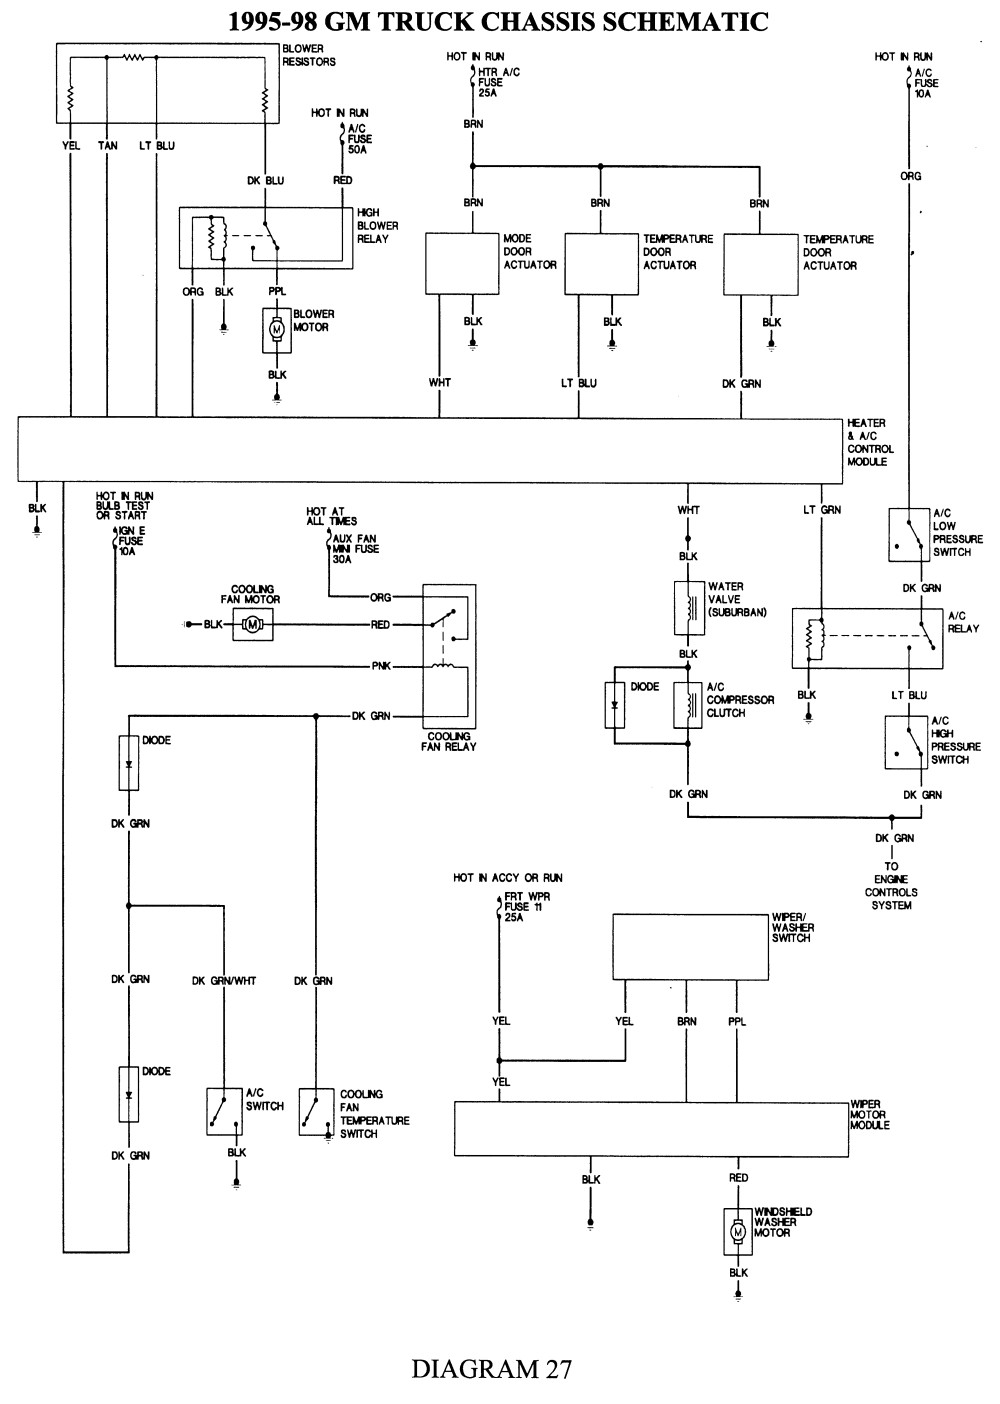 Repair Guides Wiring Diagrams Wiring Diagrams Autozone 27 1995 98 Gm Truck Chassis Schematic Image To See An Enlarged View Fig 1995 Chevy Cheyenne